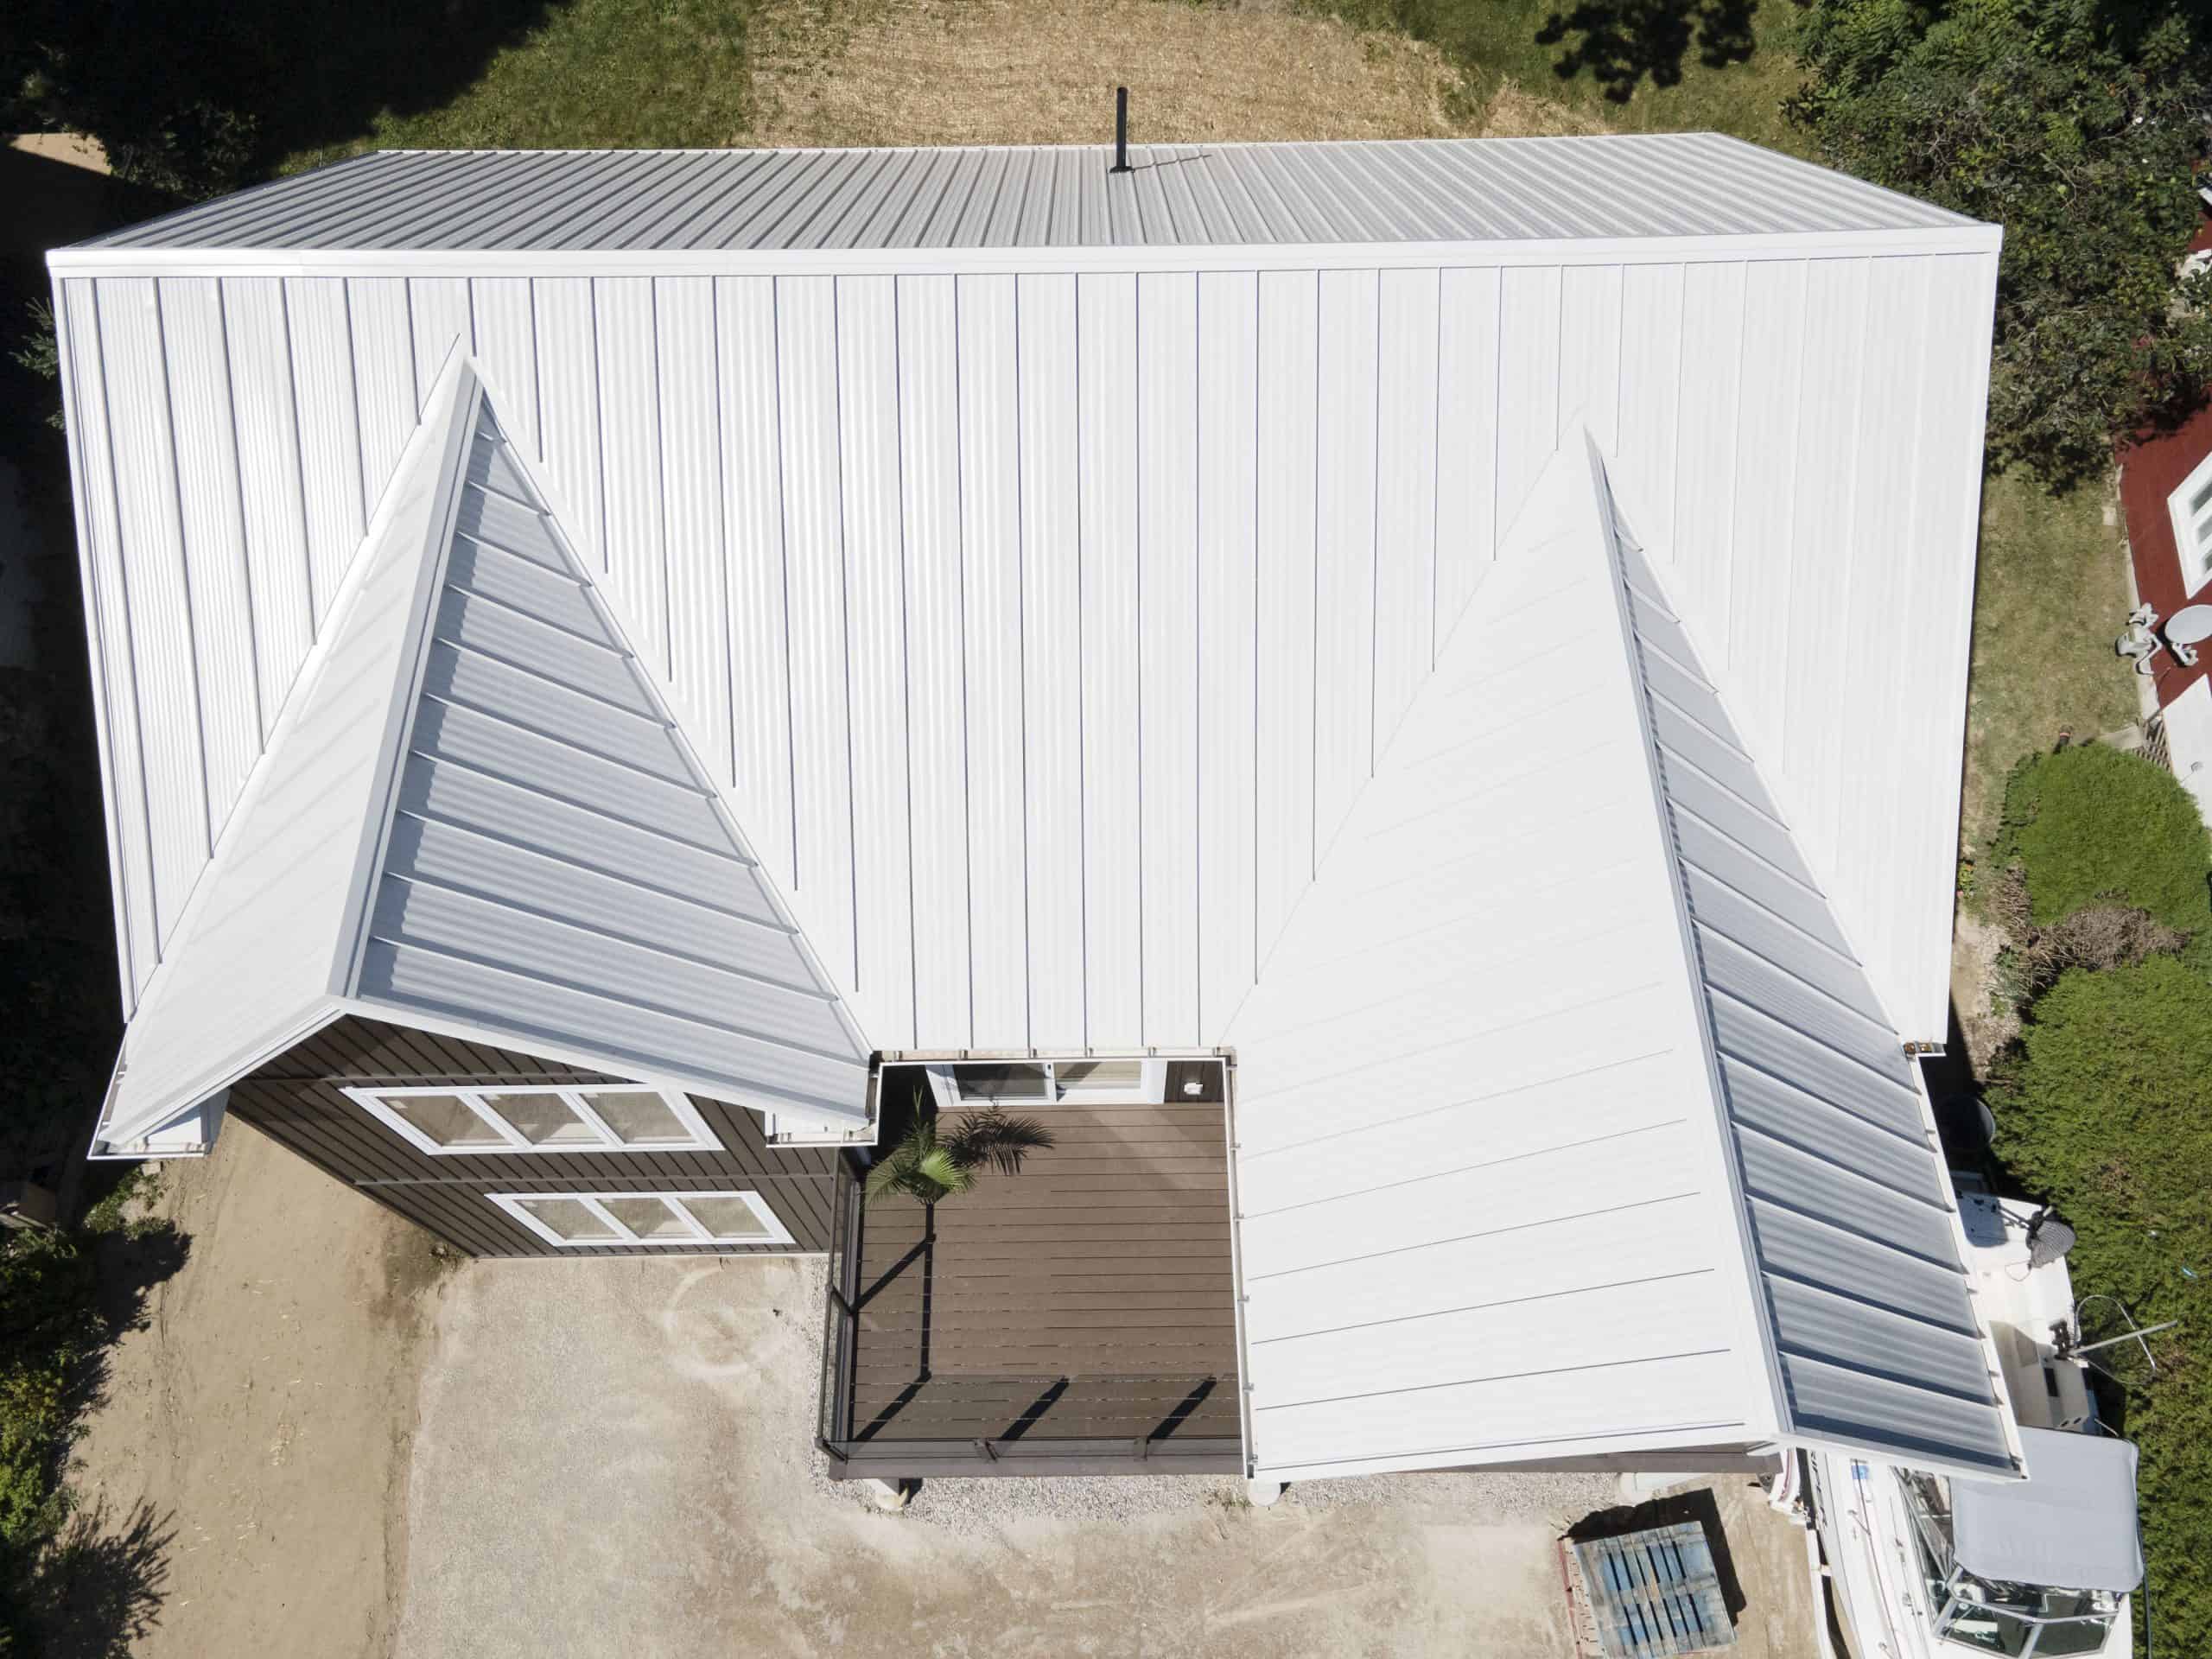 Wiseline Standing Seam Metal Roof Installed by Upright Construction Inc. based in Elgin County Ontario.